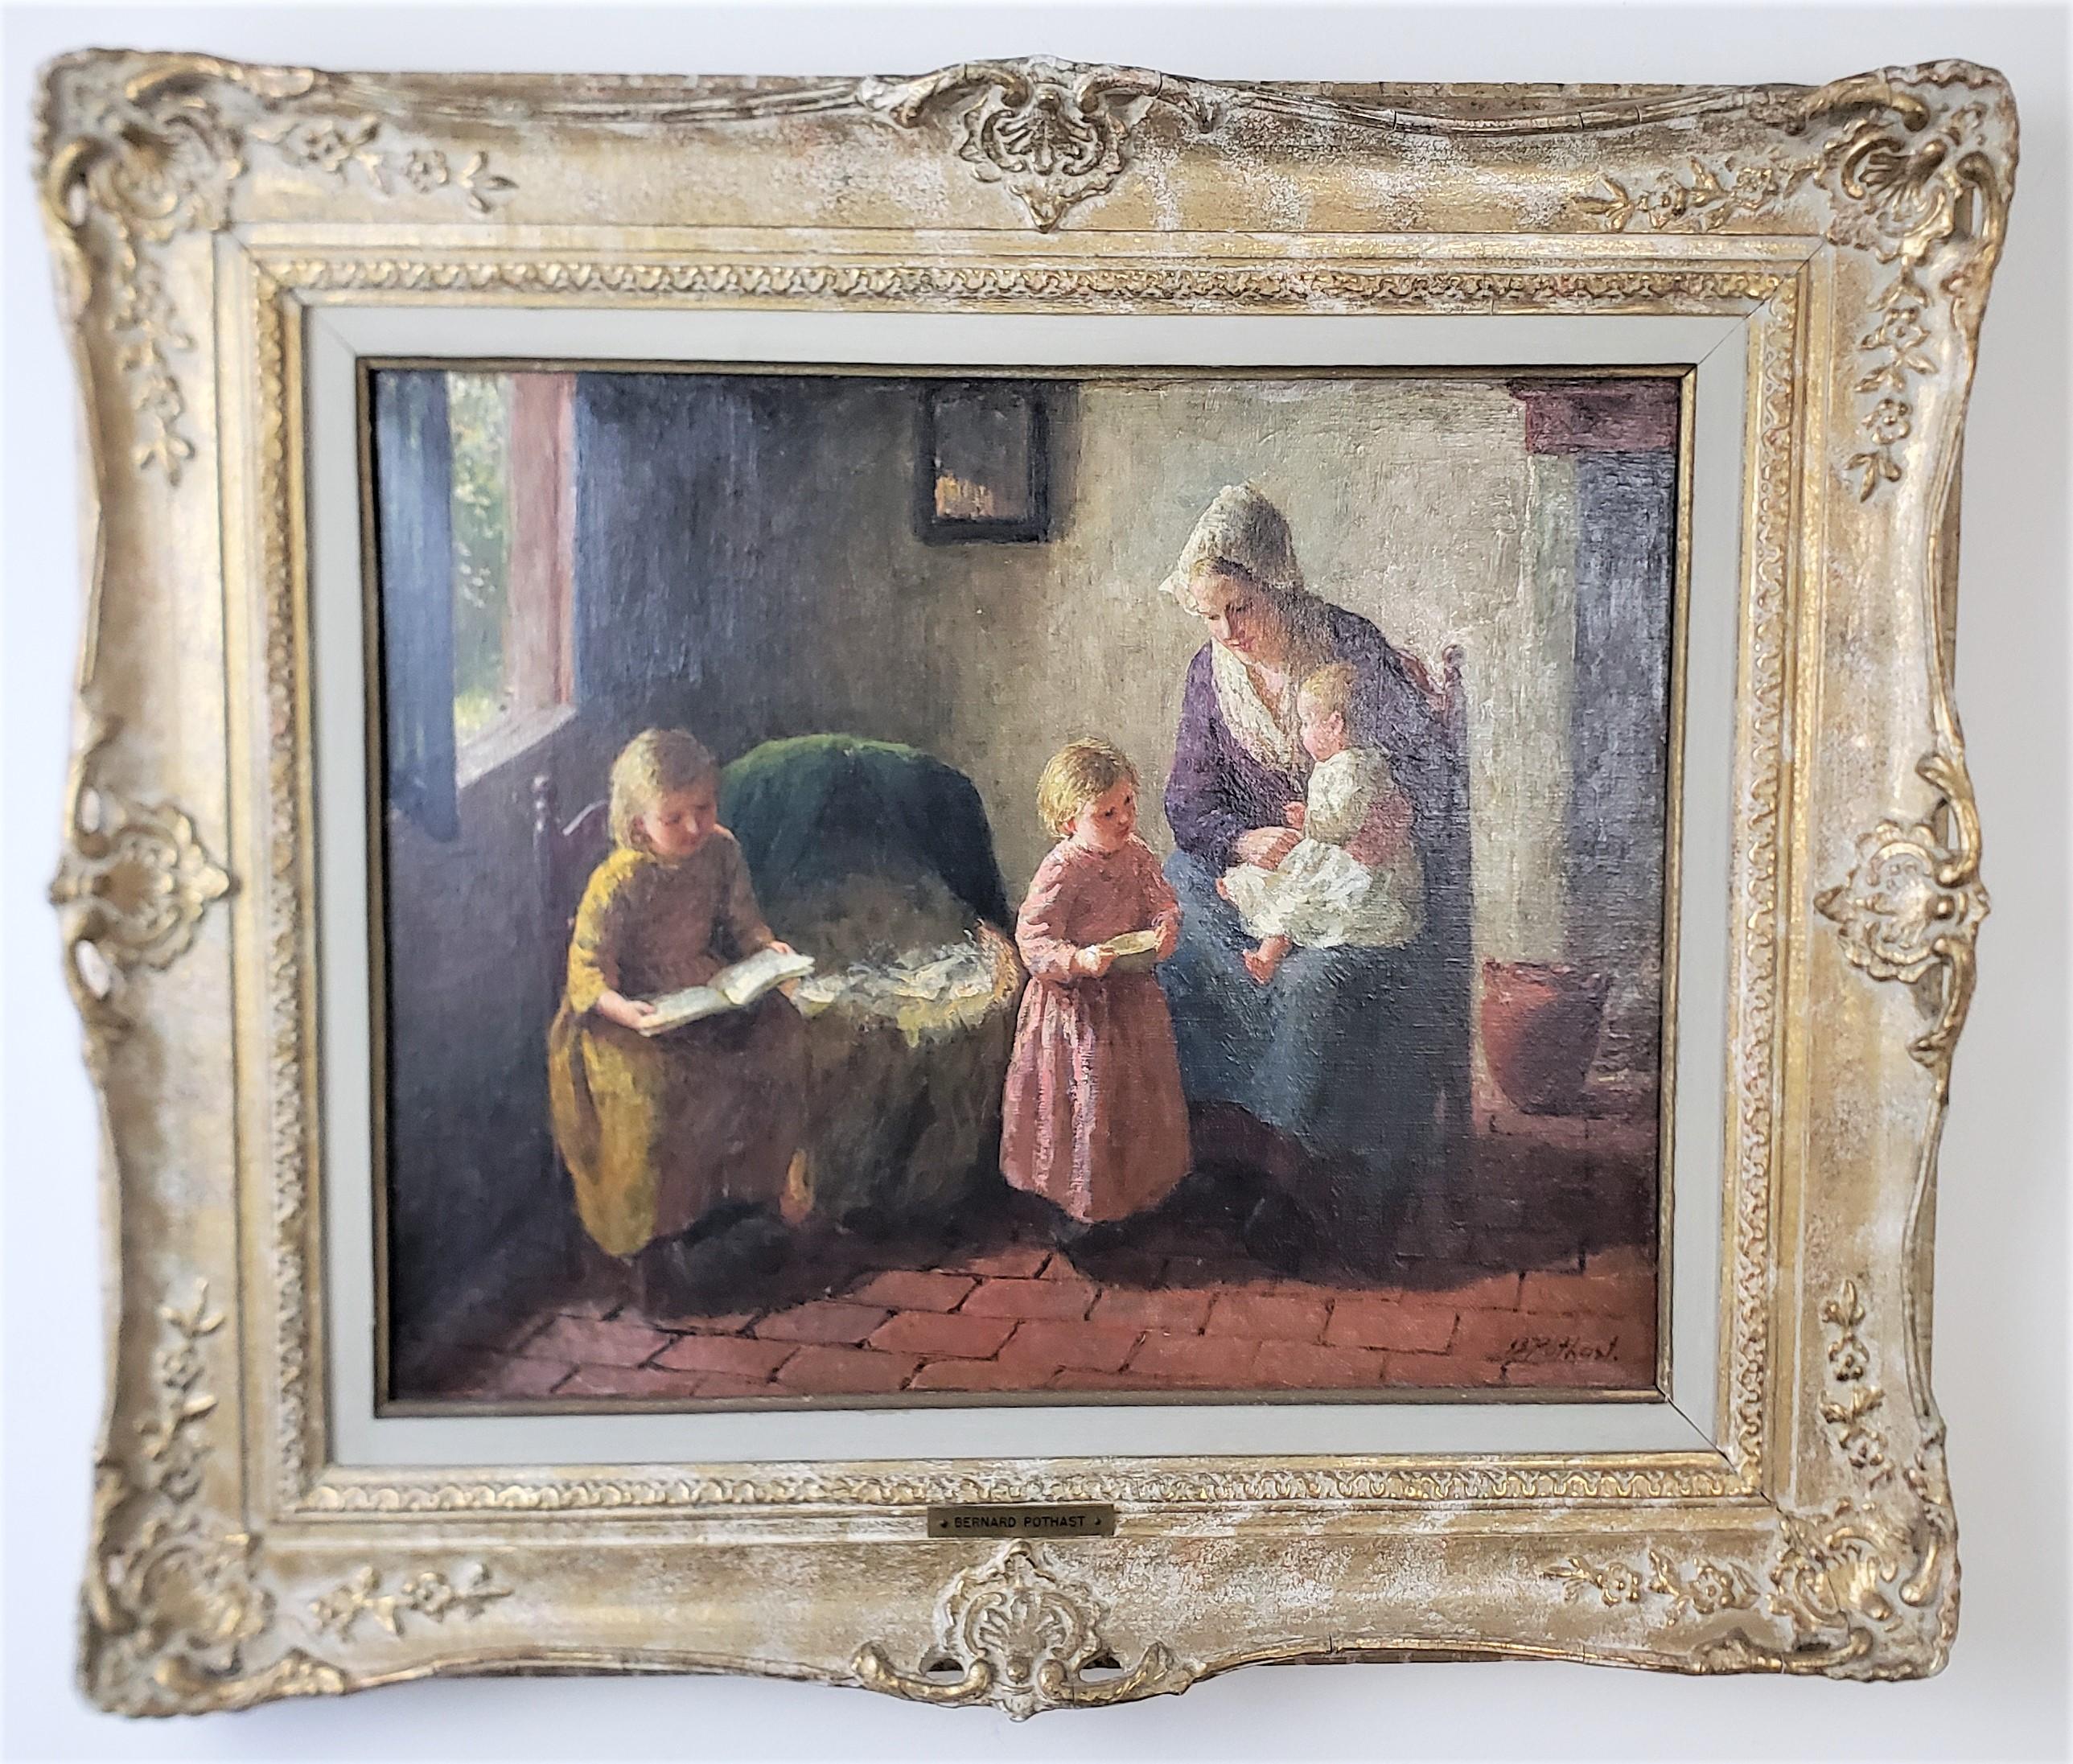 This antique framed oil painting was done by Bernard Pothast of the Netherlands in approximately 1920 in his realistic style. The painting is done on canvas and depicts an interior scene of a Dutch mother in period dress with her children. The